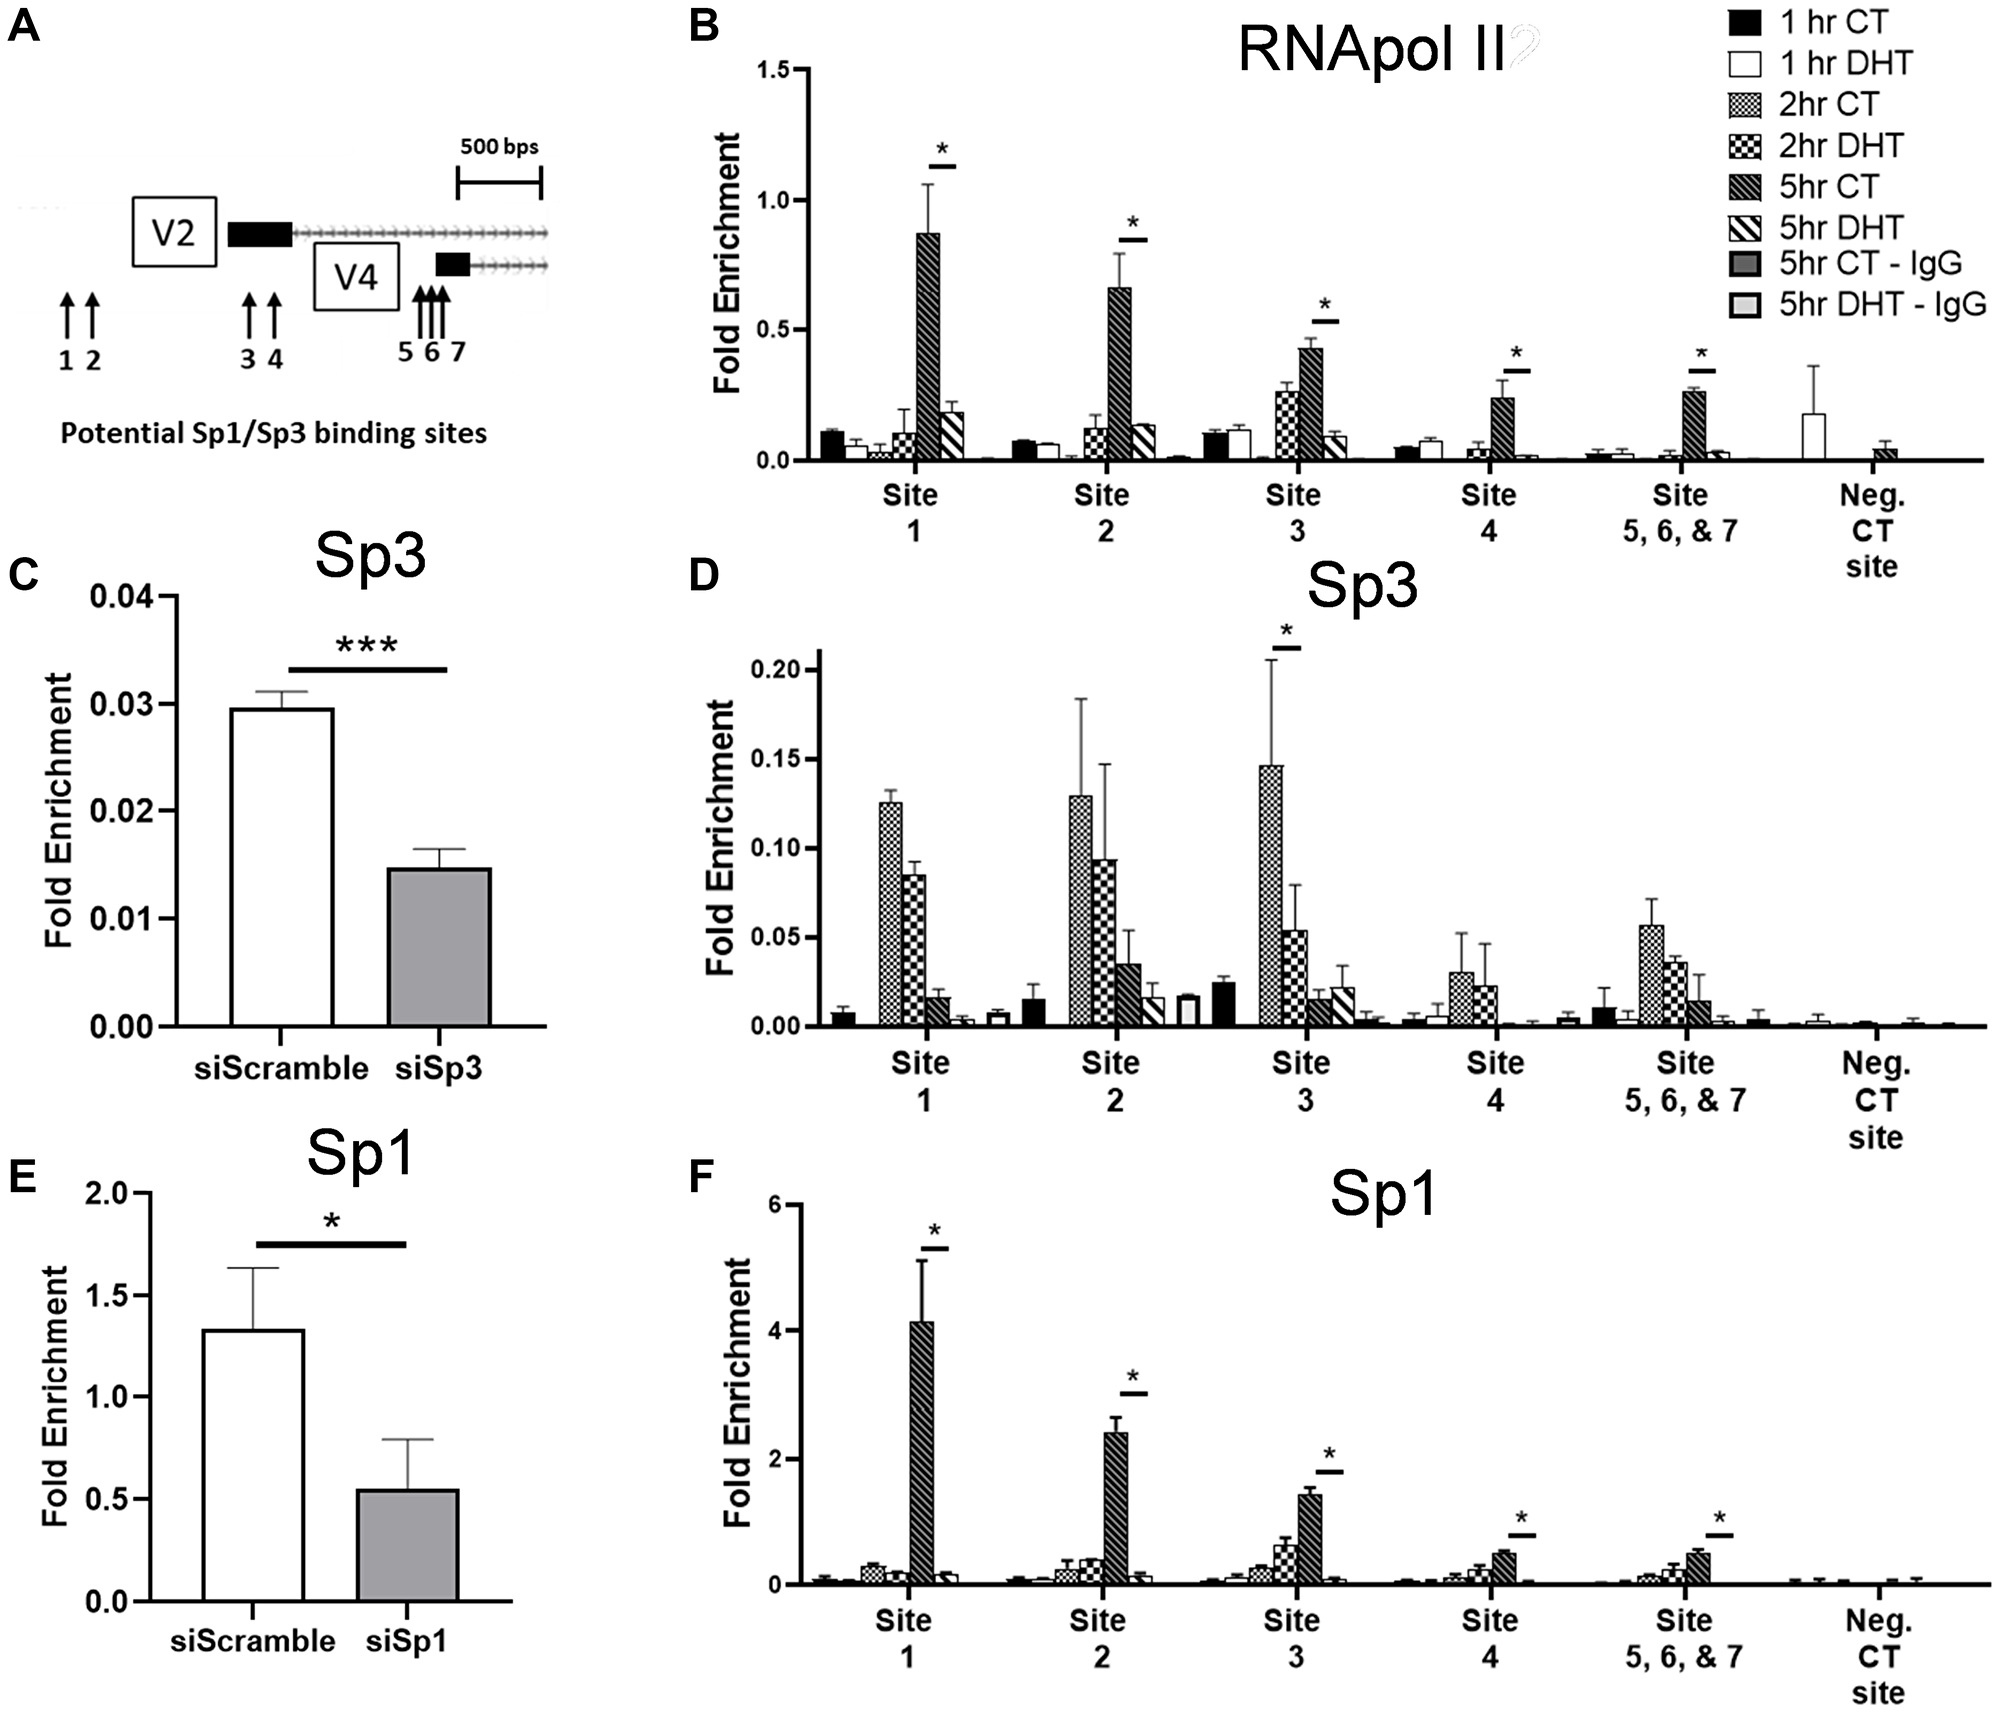 DHT treatment reduces Sp1, Sp3 and RNA pol II binding at the promoter of GPER1 following addition of complete media after low serum.